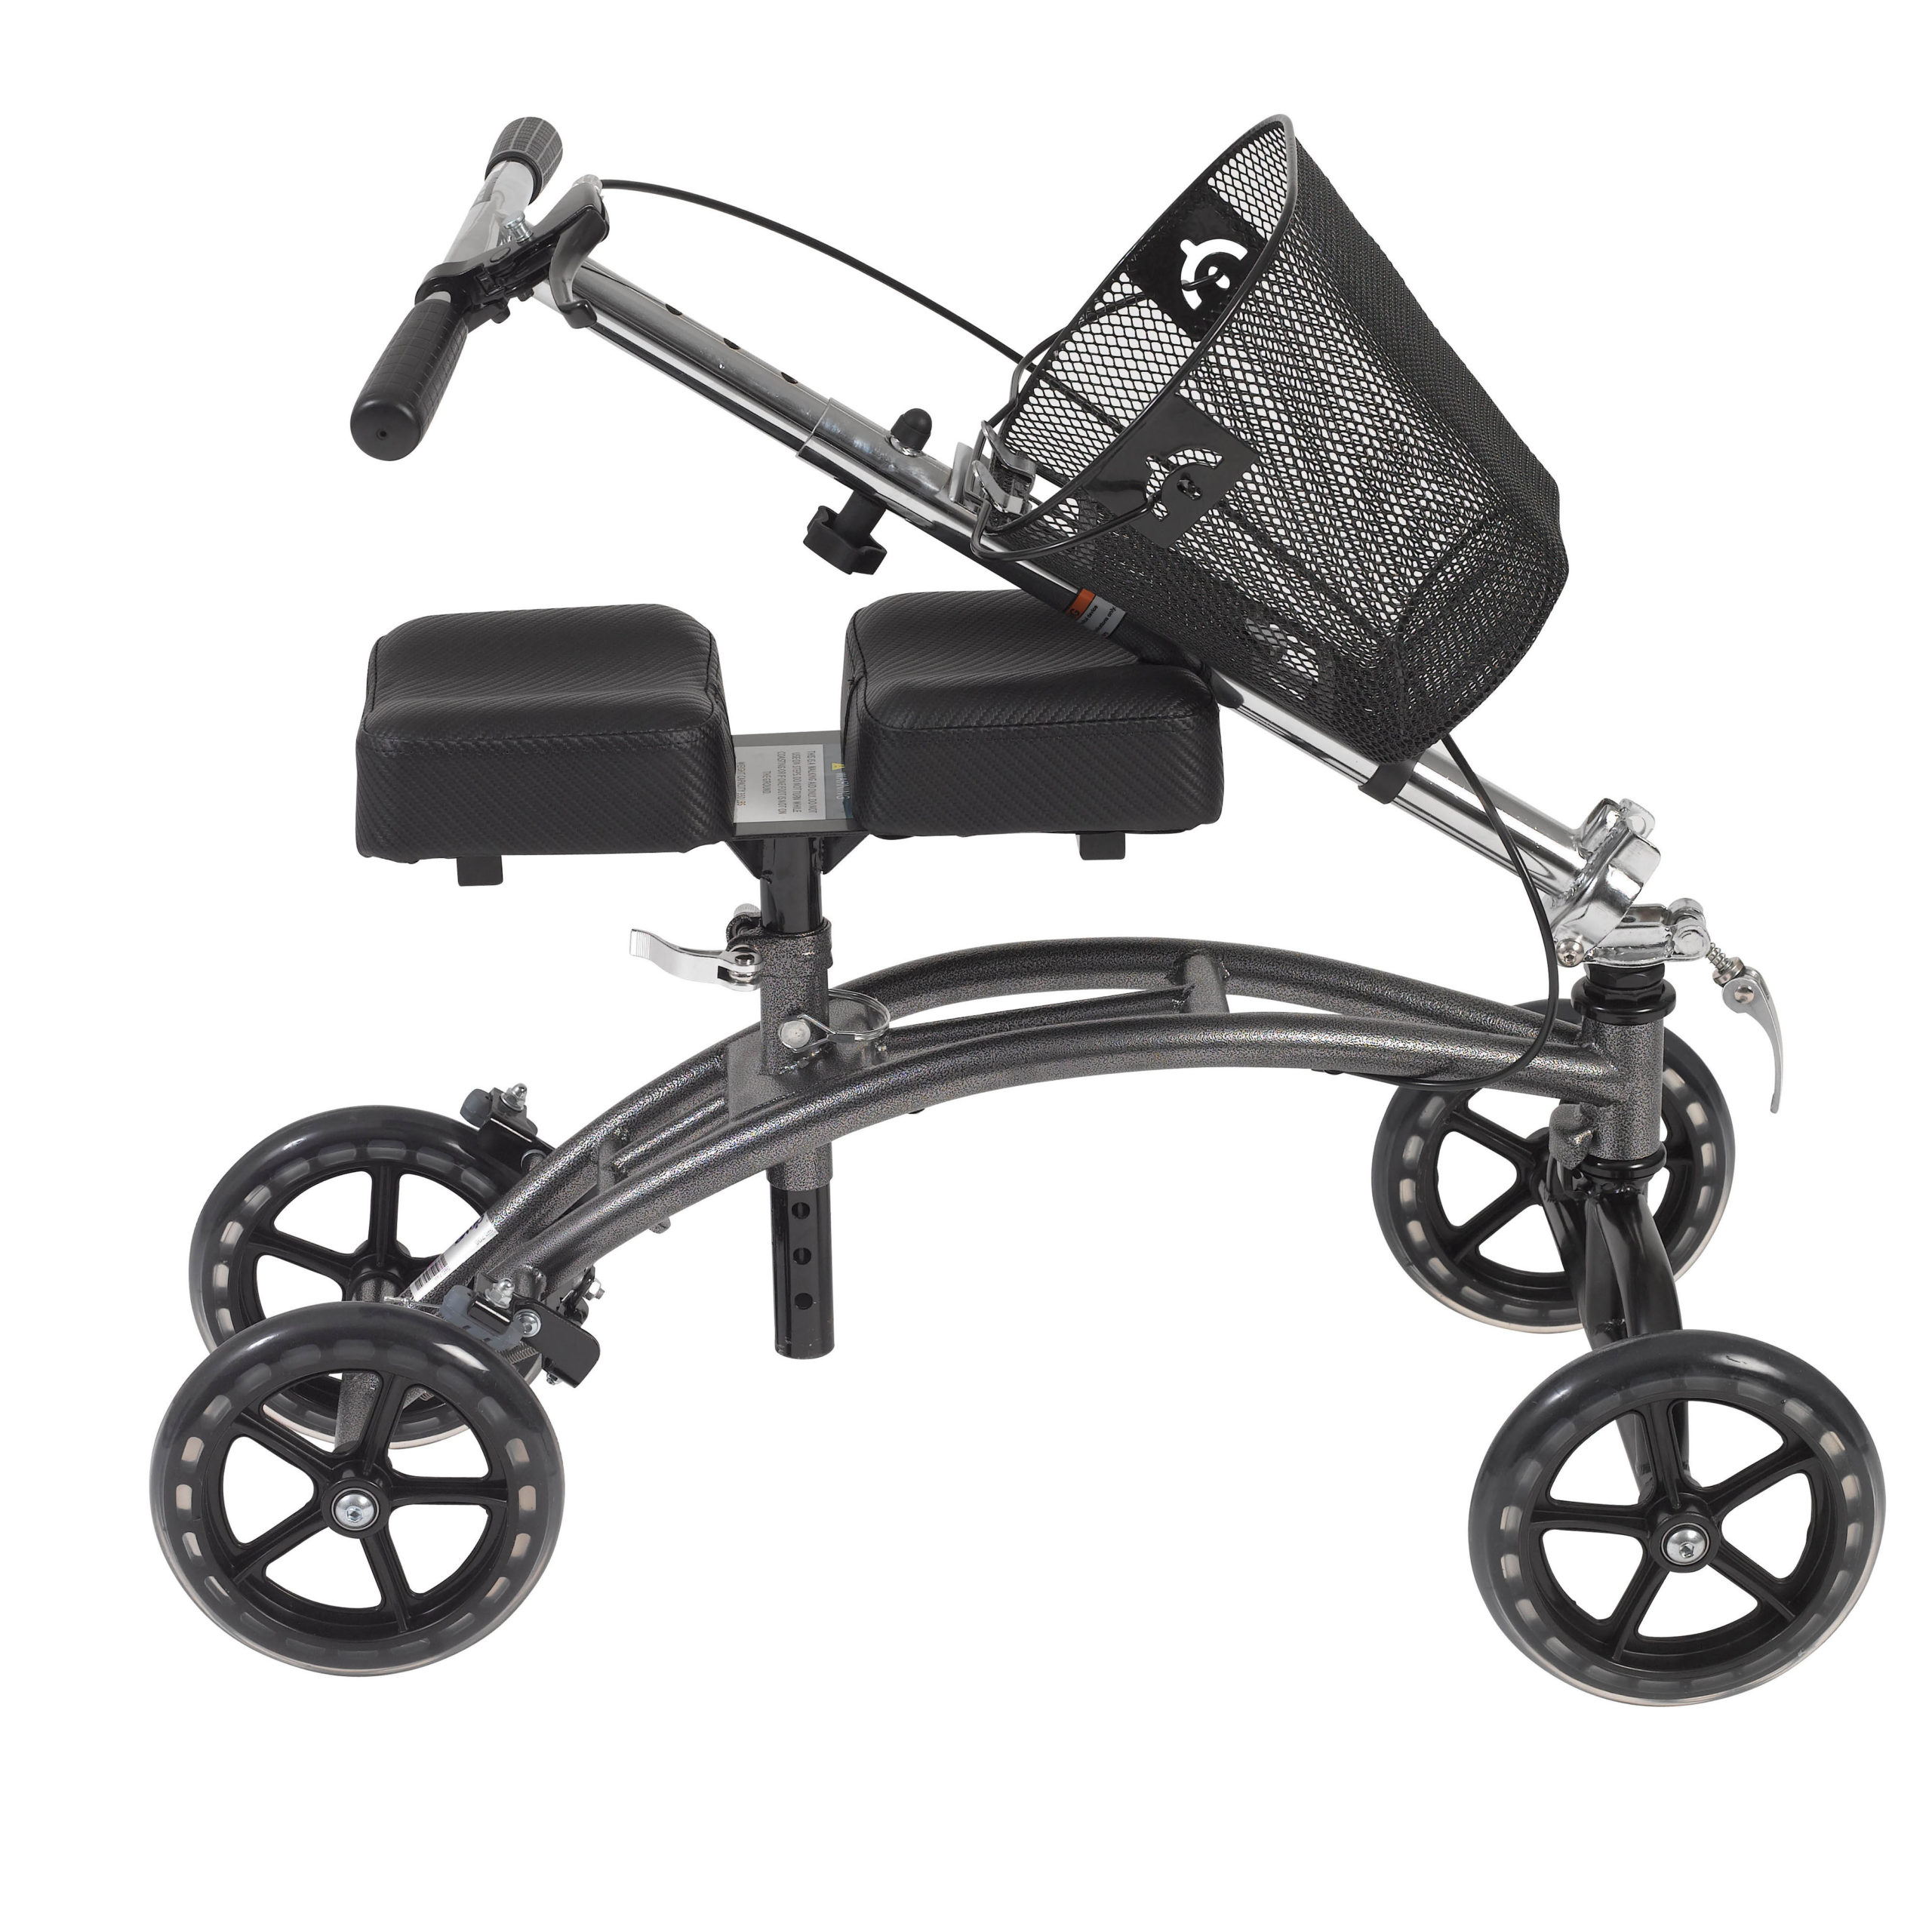 Drive Medical Dual Pad Steerable Knee Walker Knee Scooter with Basket -  Alternative to Crutches